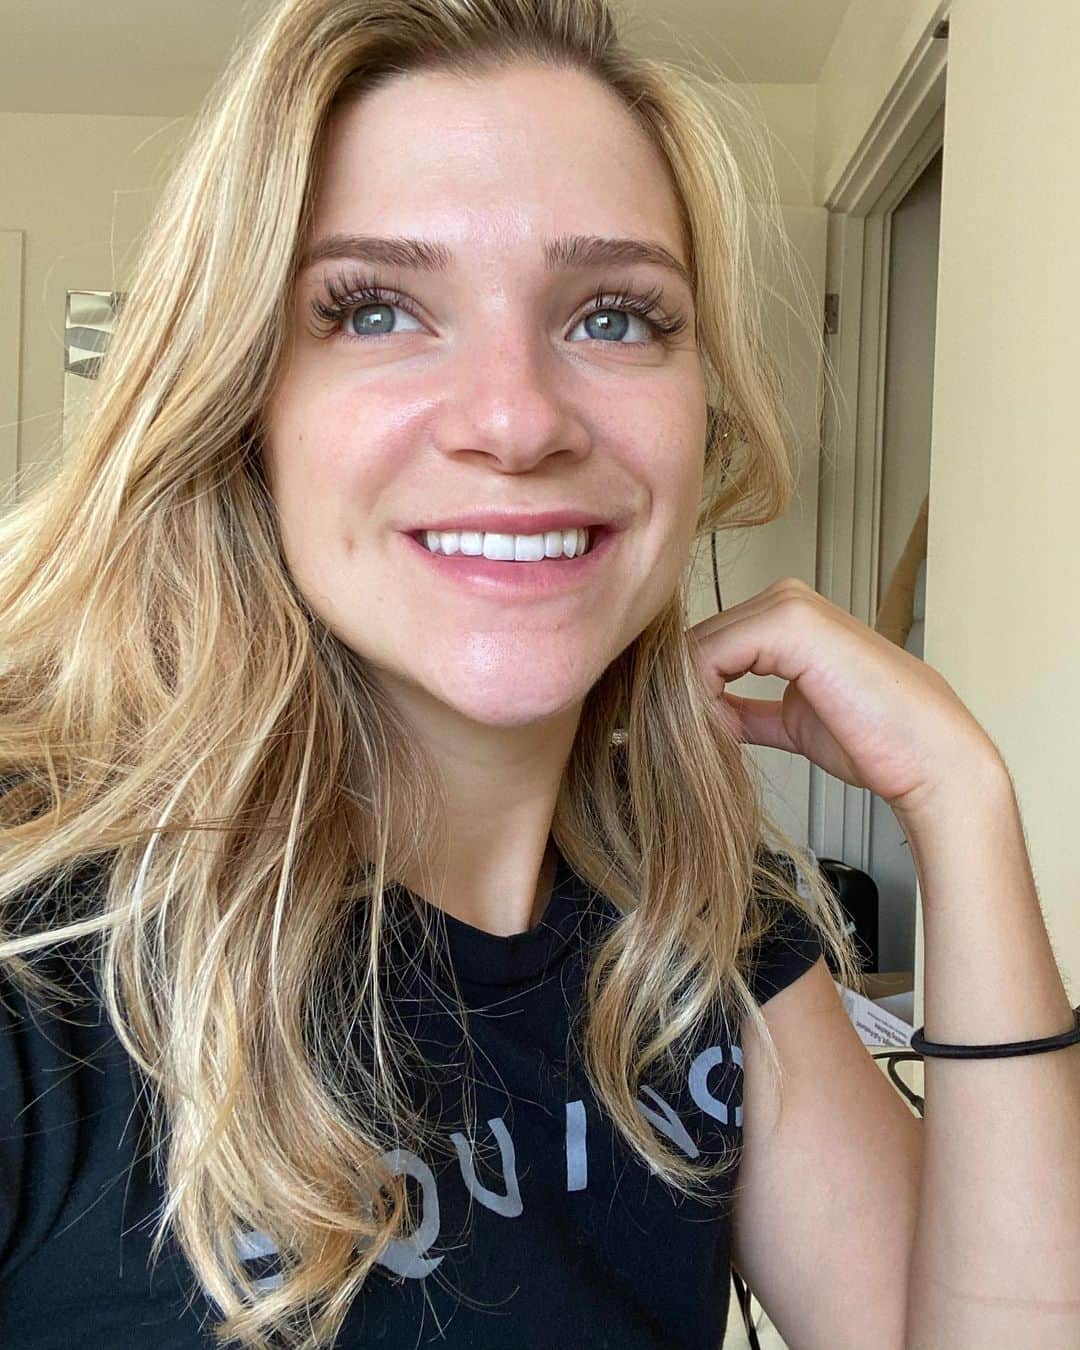 Monica Churchのインスタグラム：「No makeup, all natural everything... except for my TEETH! 😁🦷 I decided to get veneers (swipe for the before) and I am so happy with my decision. New video up allllll about the process! From price, to pain, to having nightmares about my teeth falling out..? I got you covered if your looking into veneers. Special thanks to @davincidentist. I loved the service there and wouldn’t trust anyone else! (not sponsored!)」